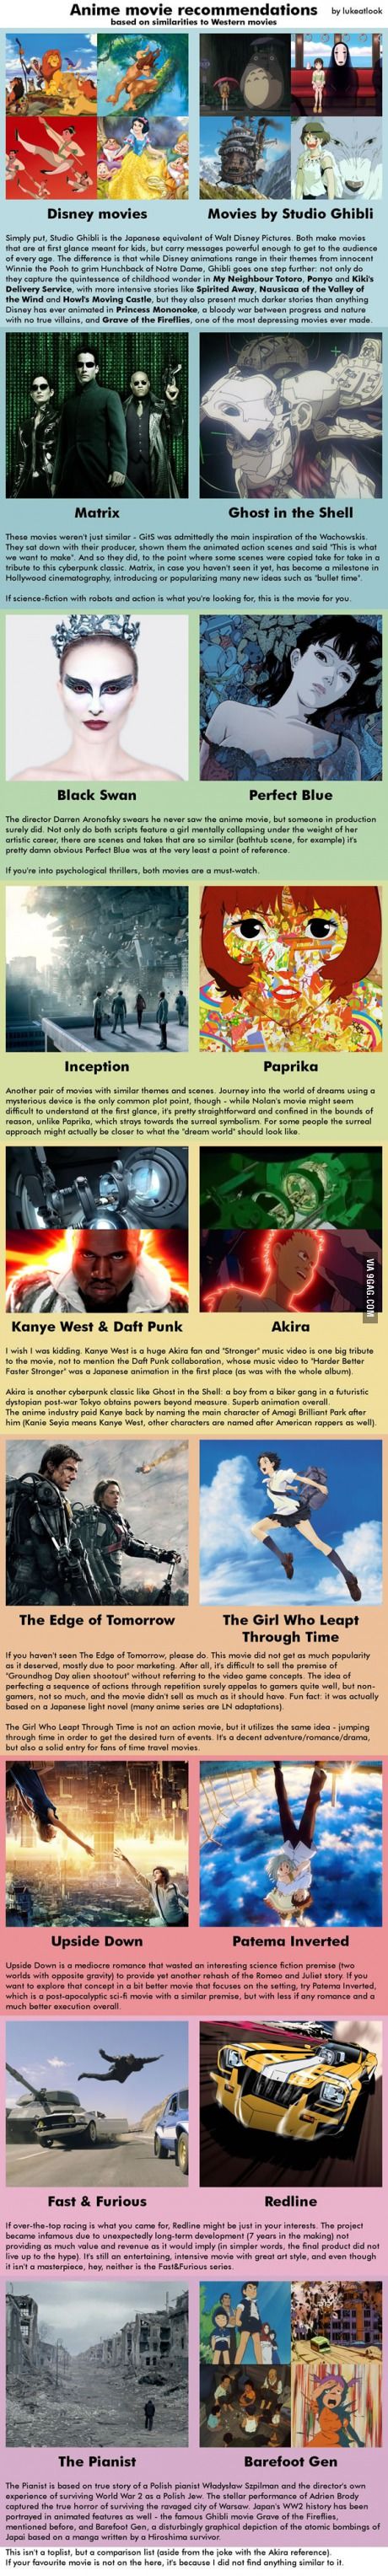 9 examples of Hollywood movies based on or similar to anime